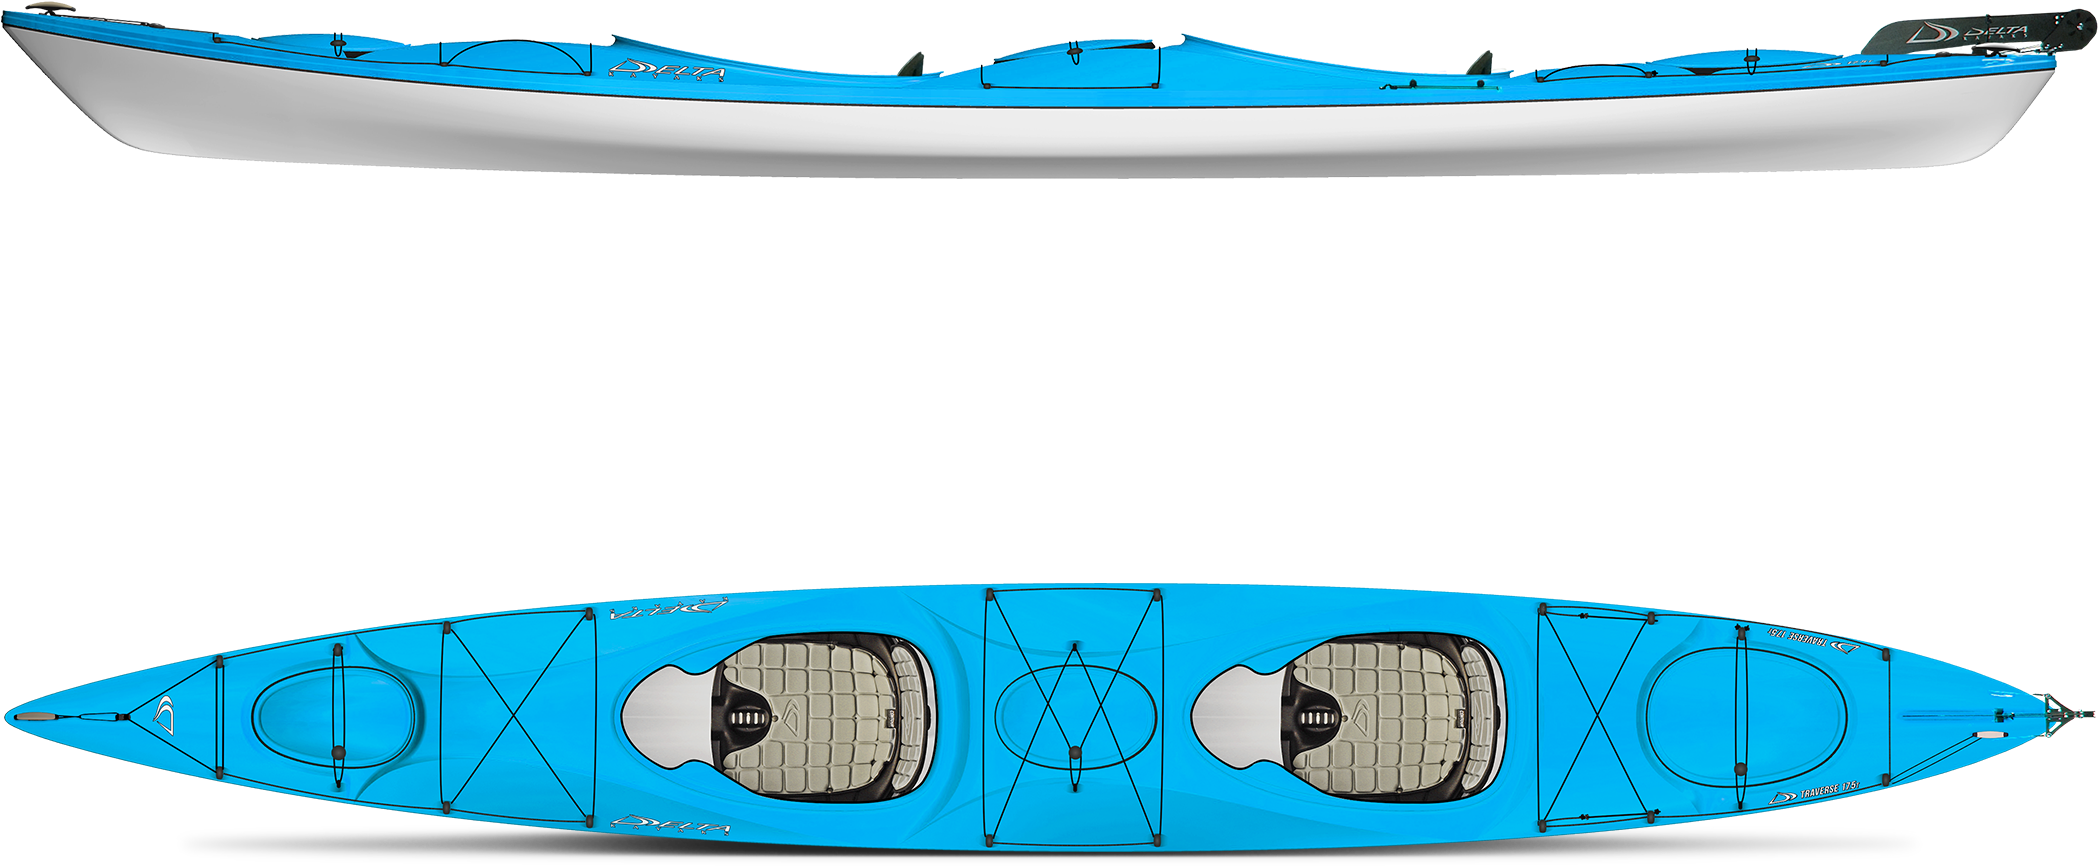 A Blue And White Kayak